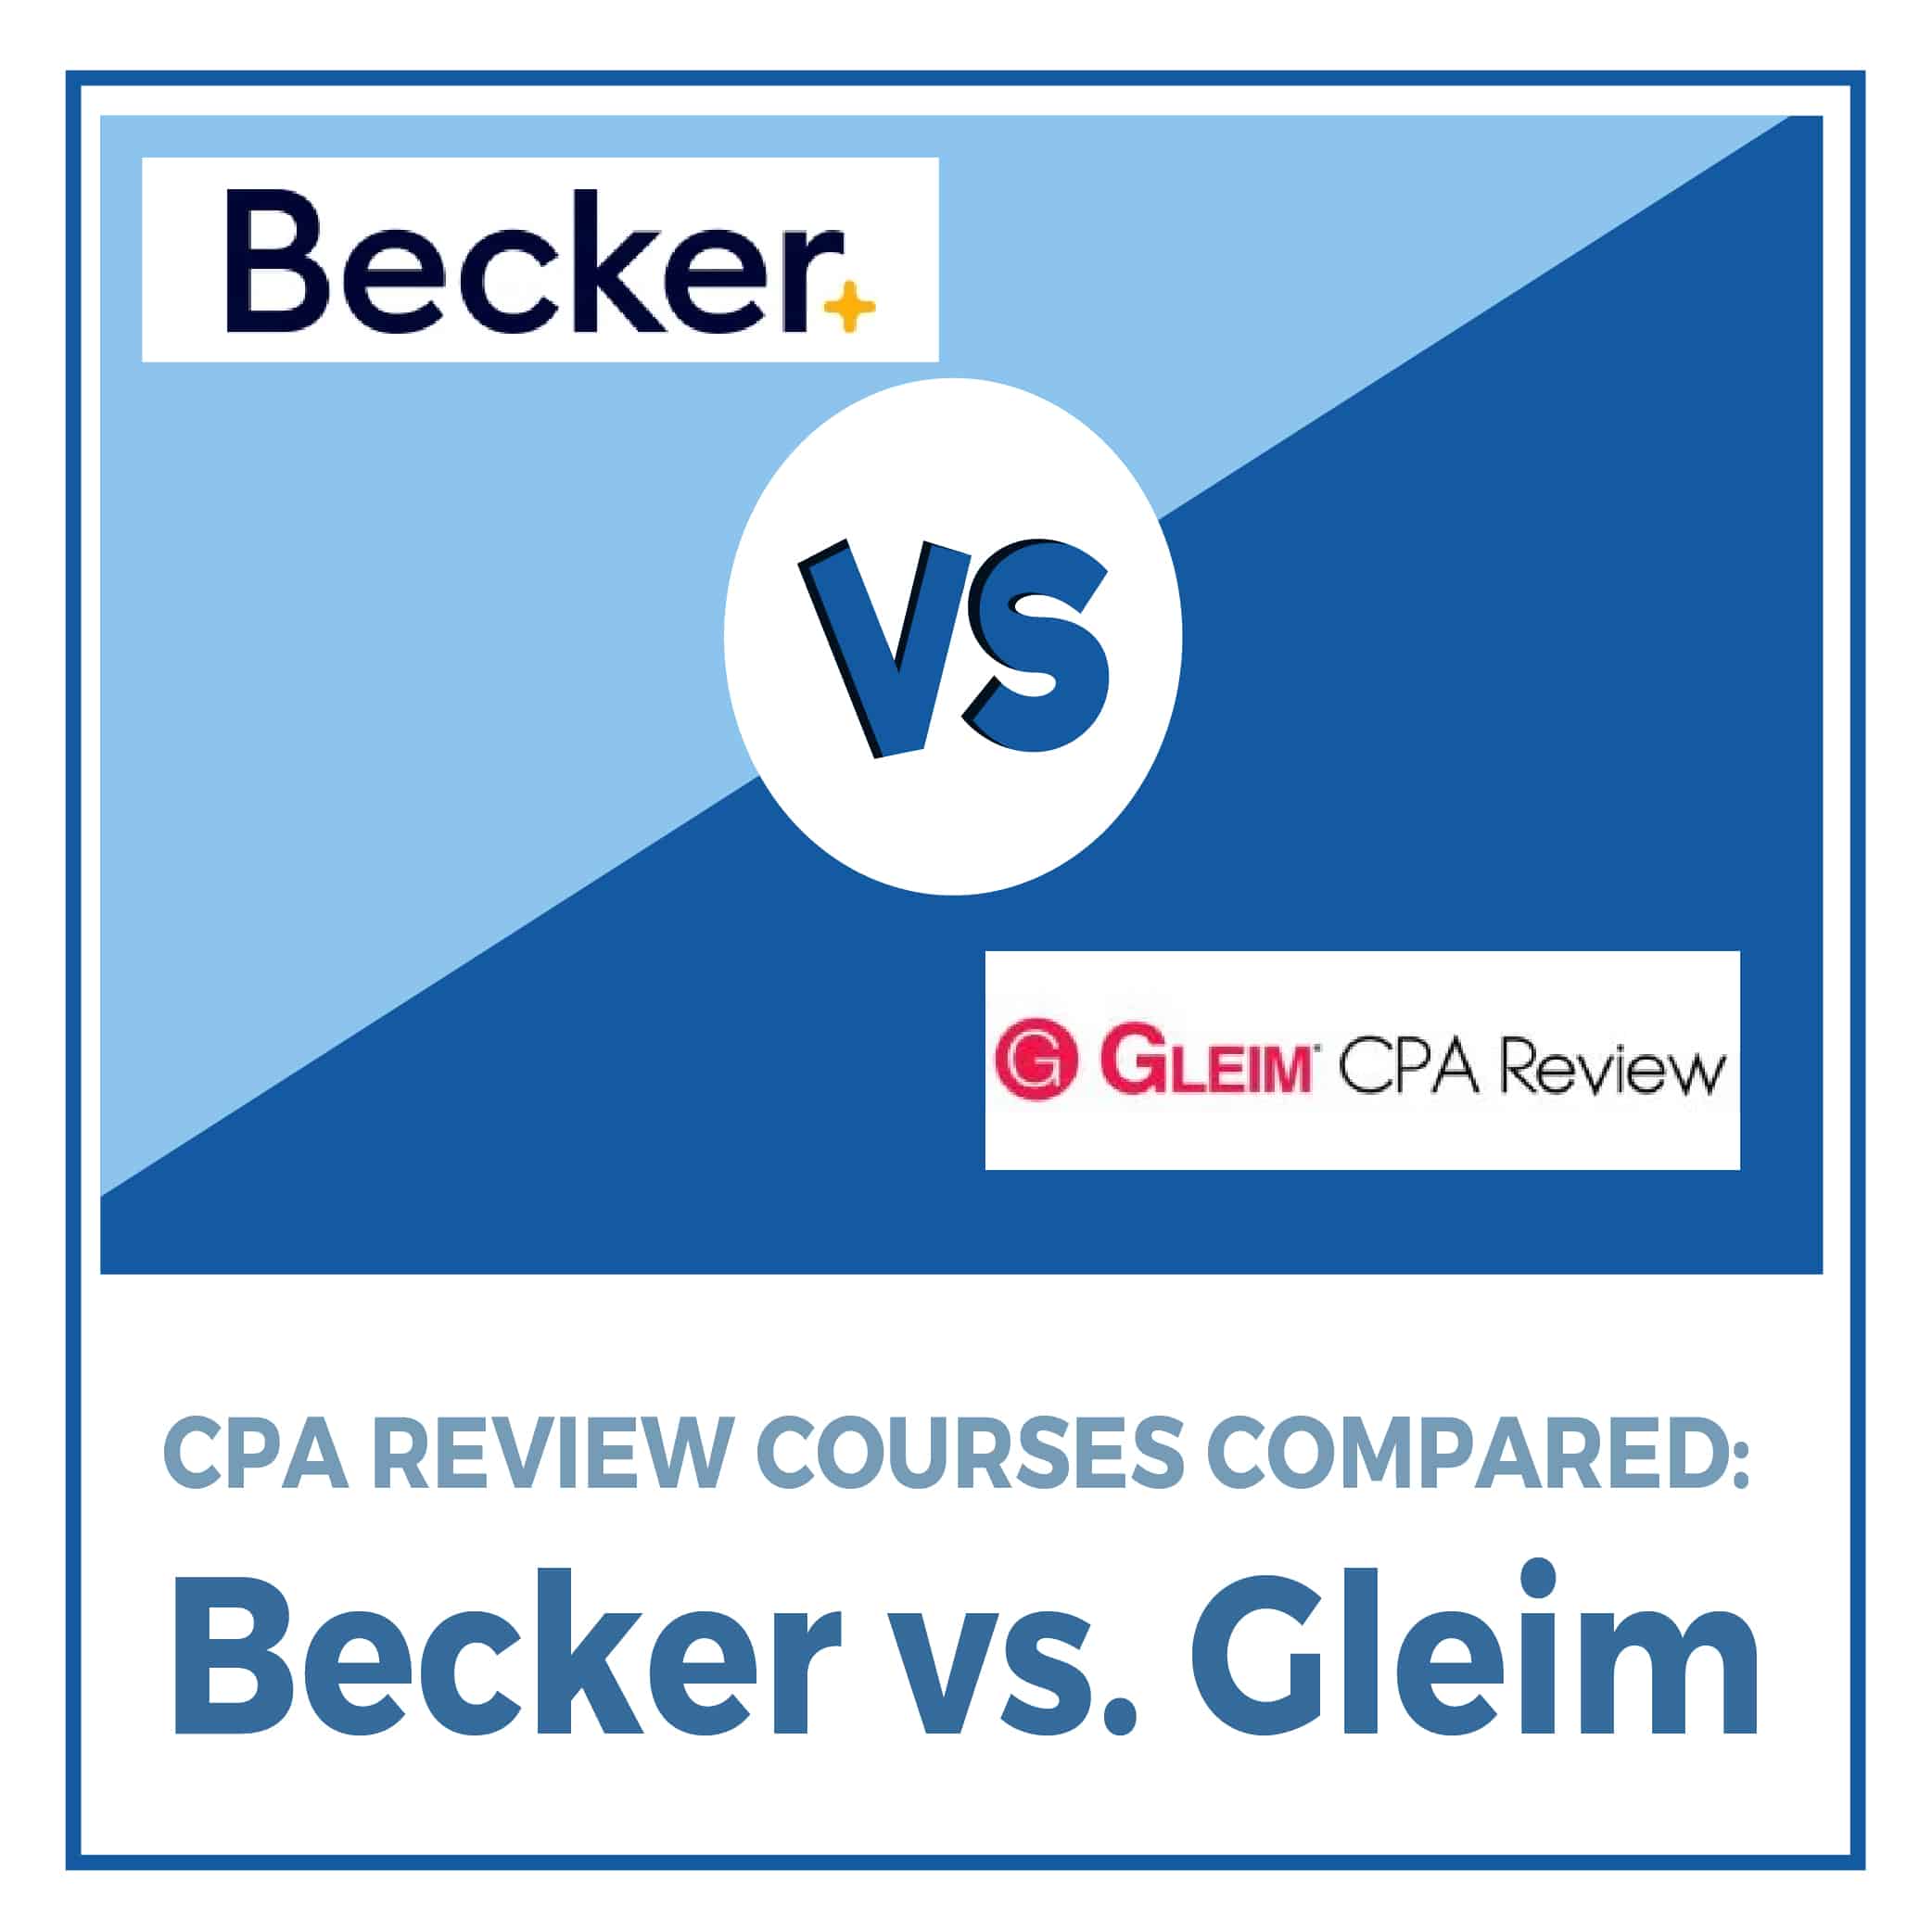 becker cpa price